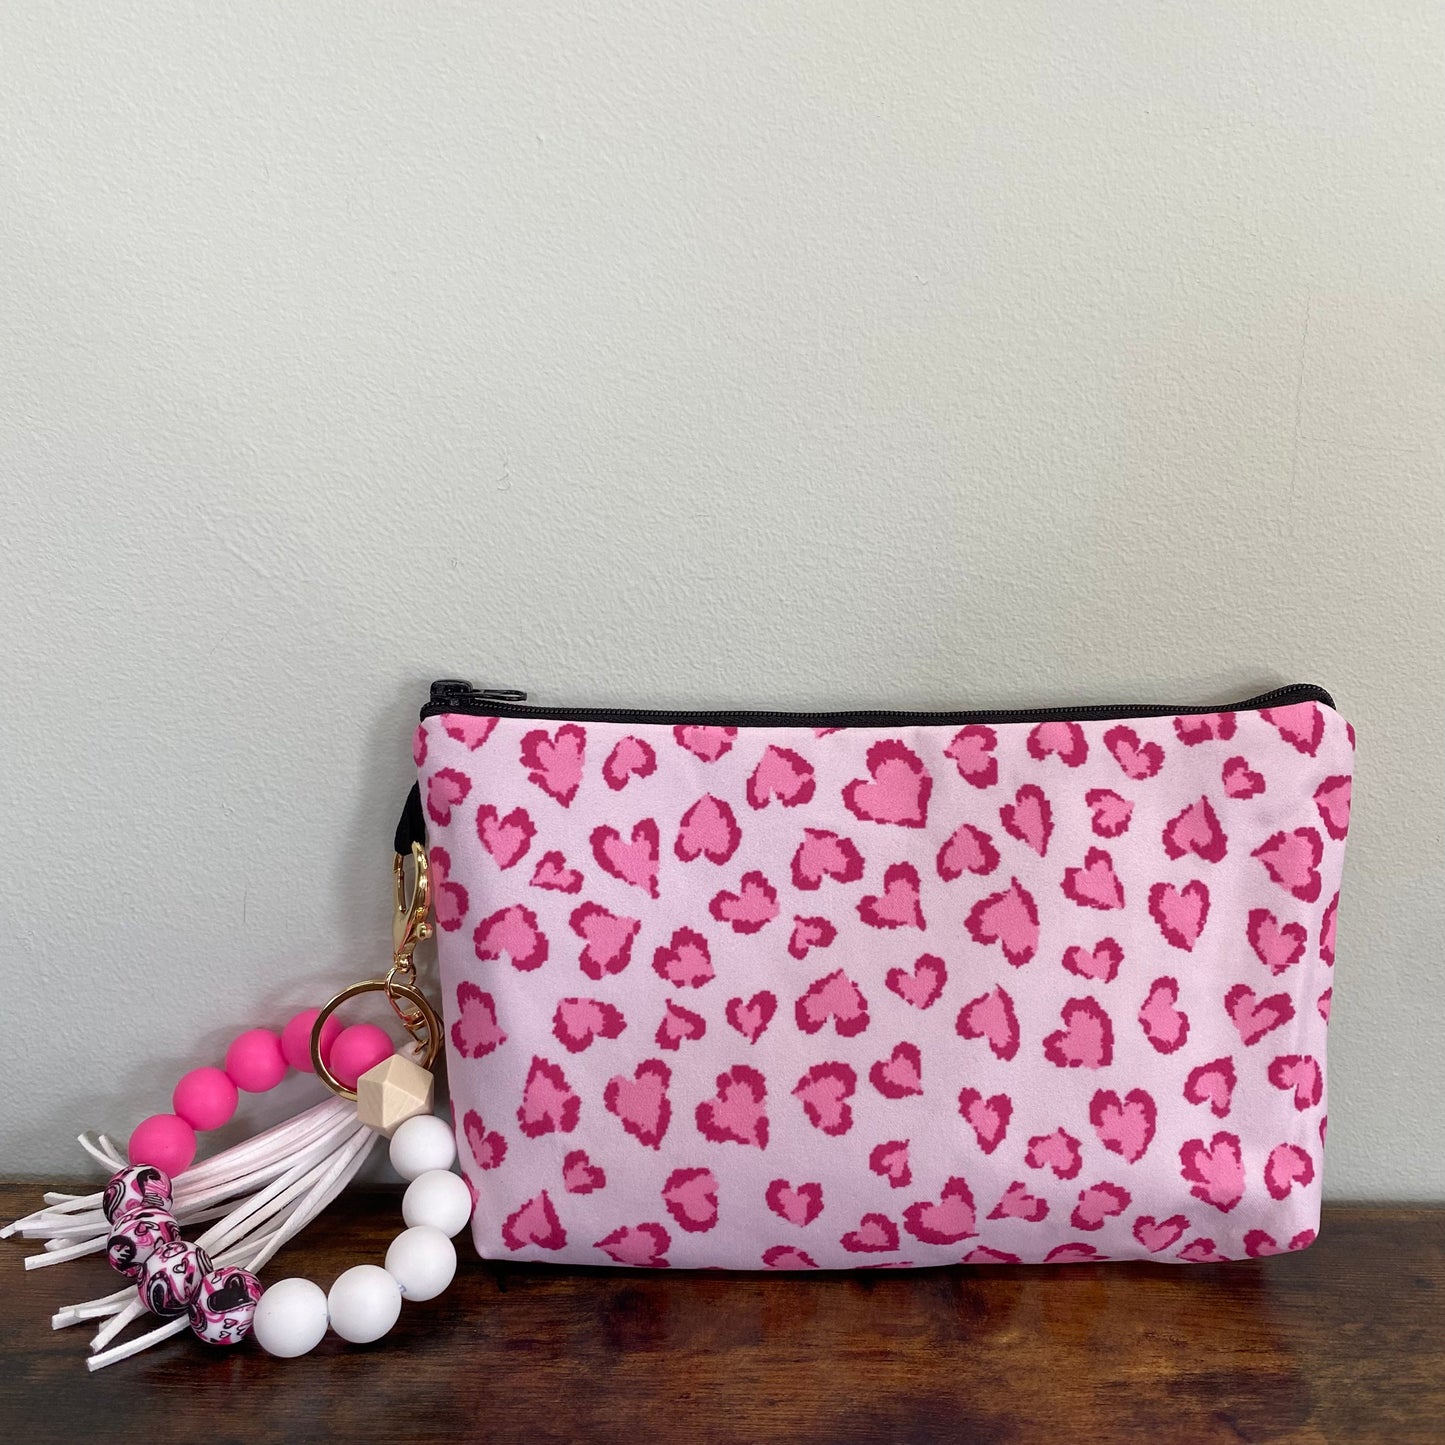 Pouch - Animal Print Pink Heart